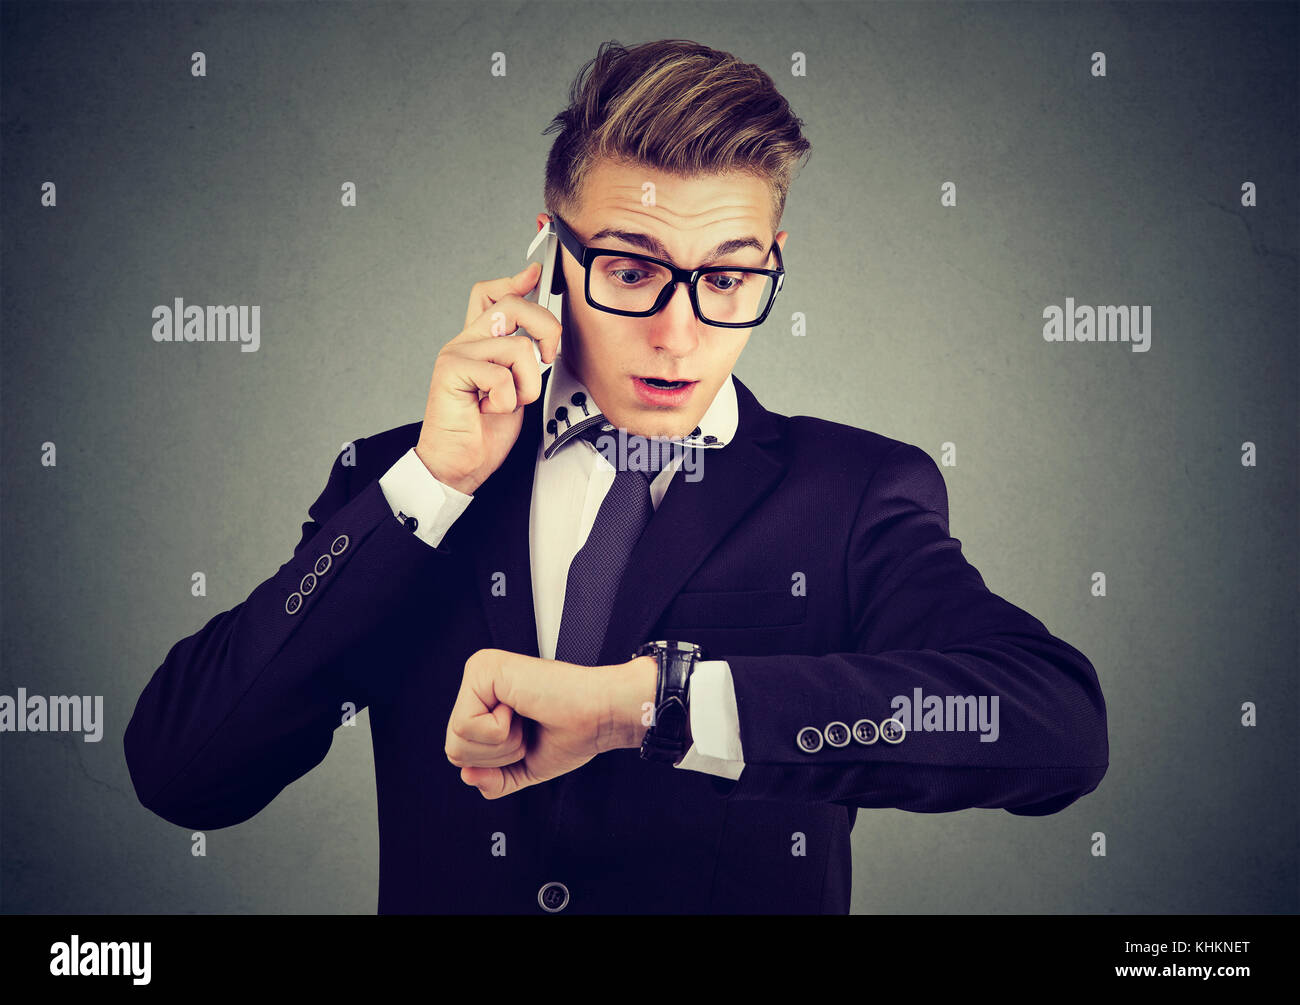 Business and time management concept. Businessman looking at wrist watch, talking on mobile phone running late for meeting. Time is money Stock Photo